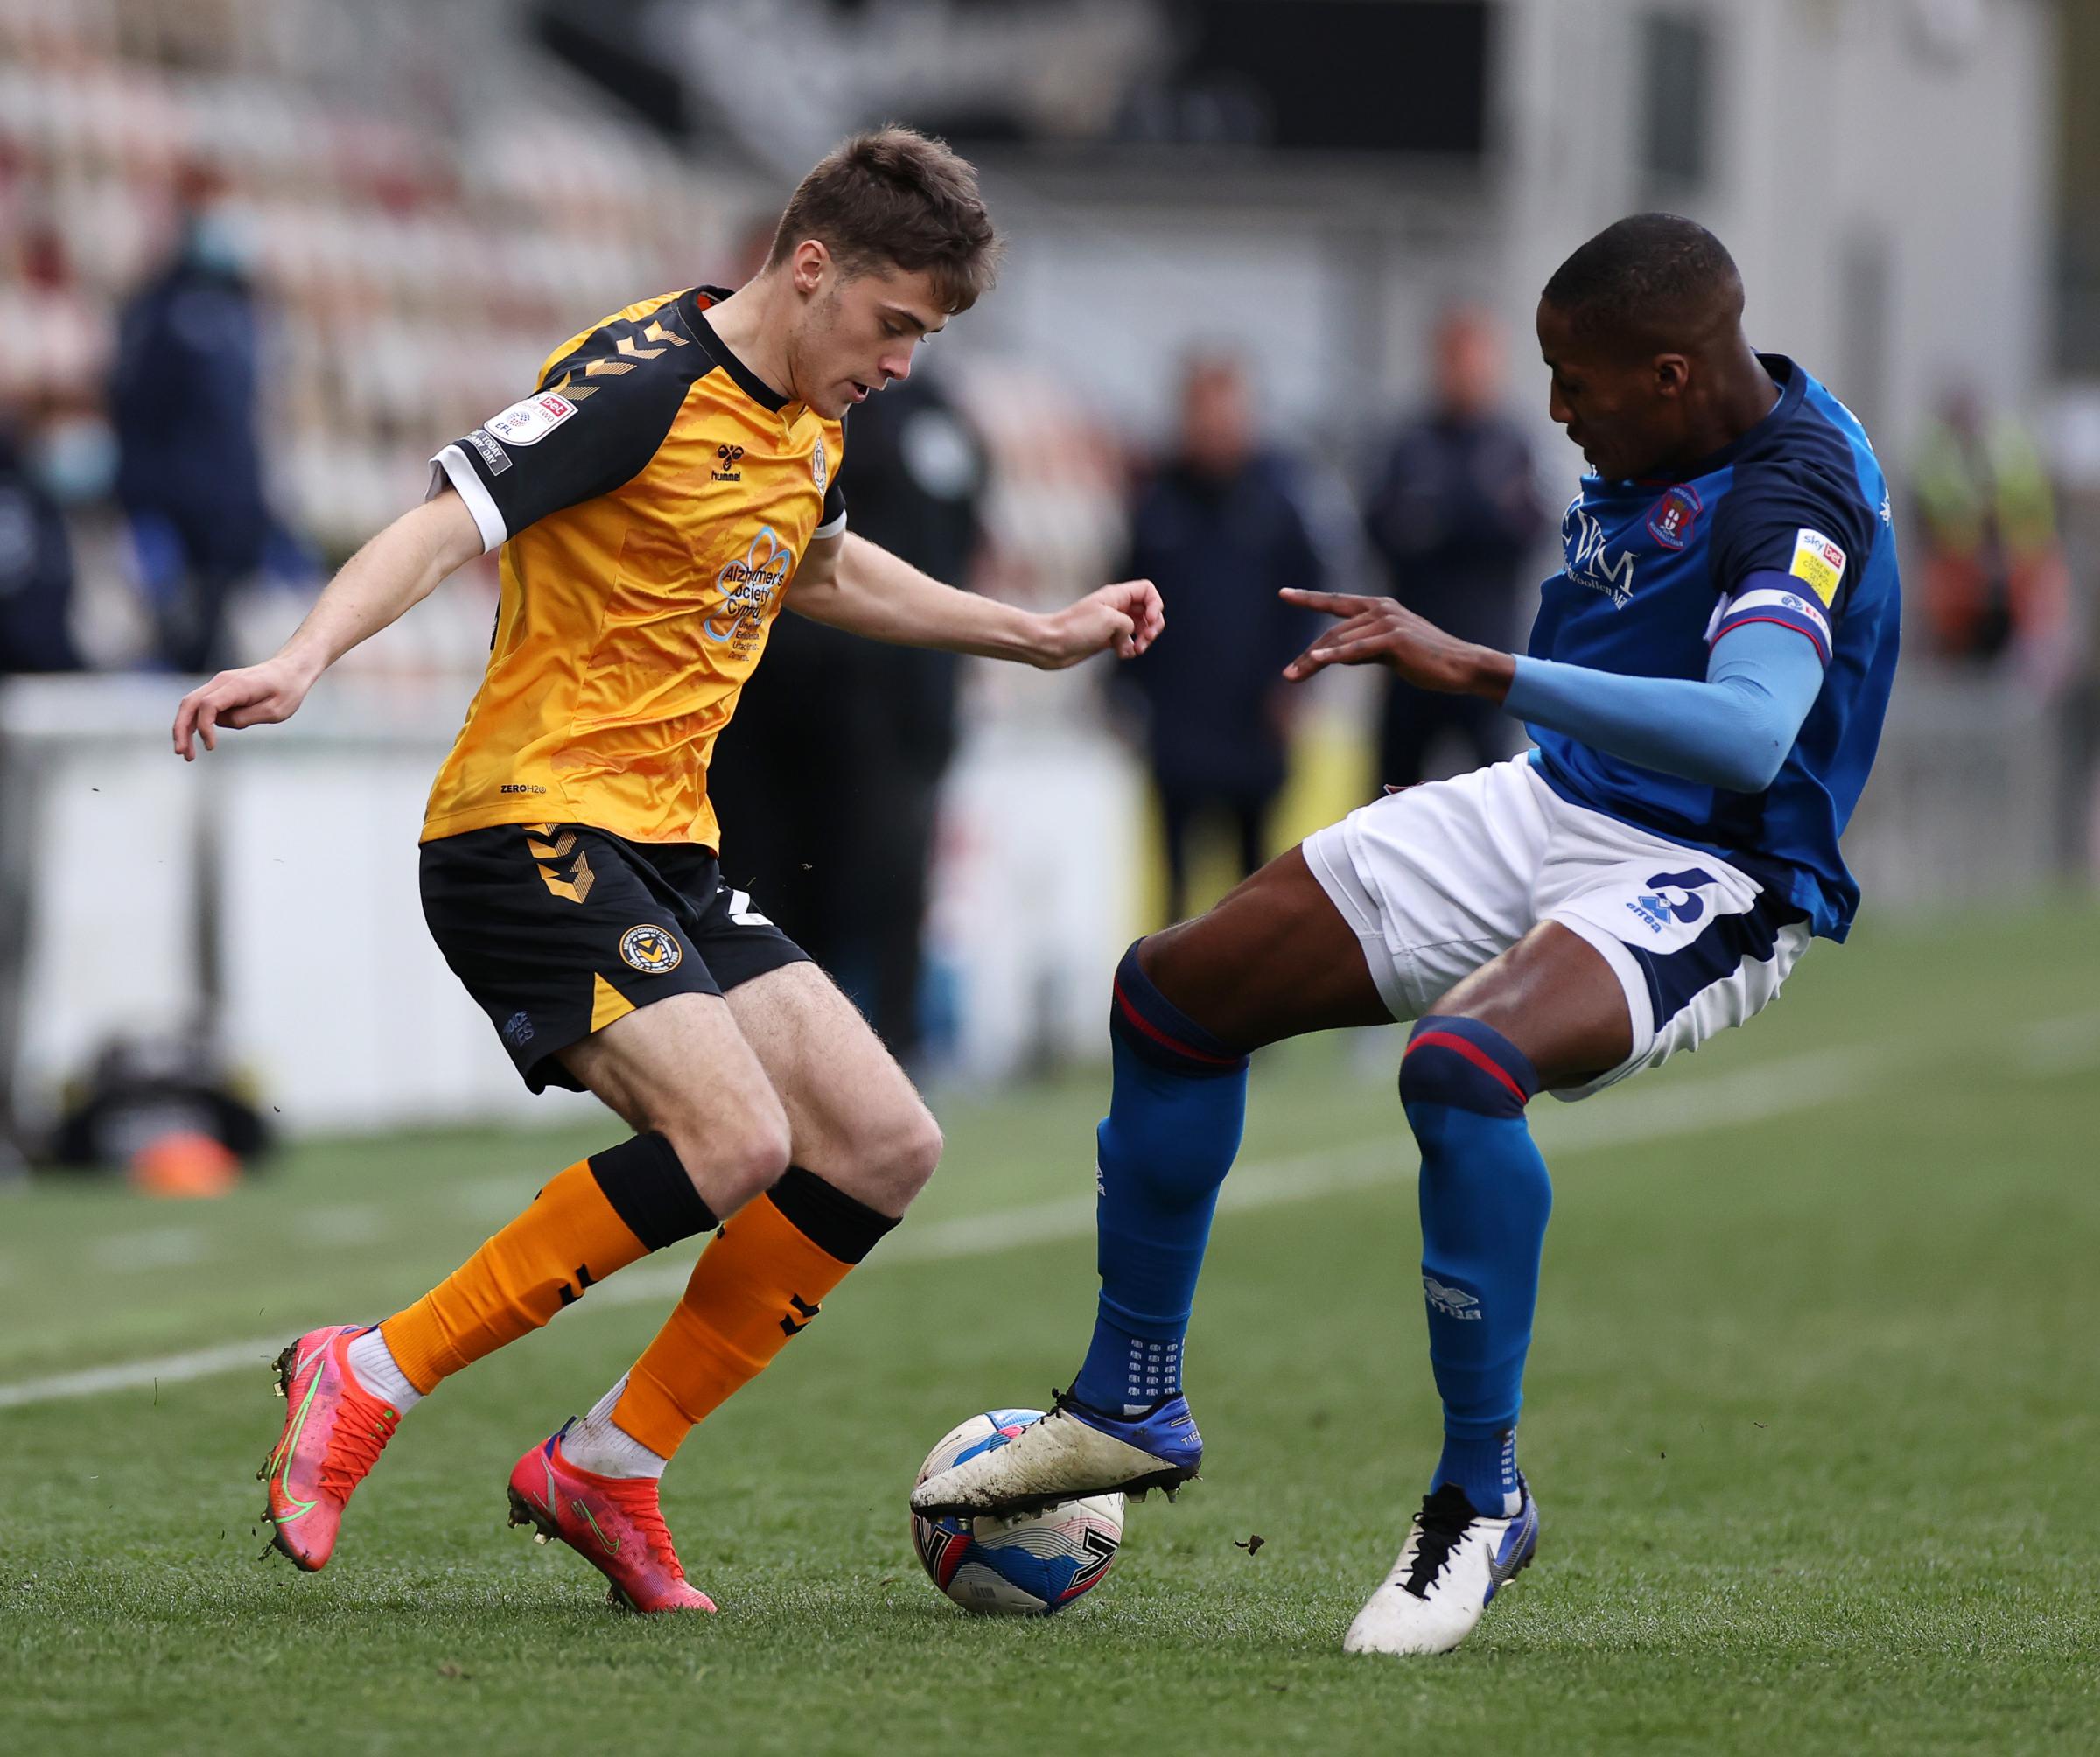 LIVELY: Lewis Collins of Newport County is tackled by Aaron Hayden of Carlisle United.